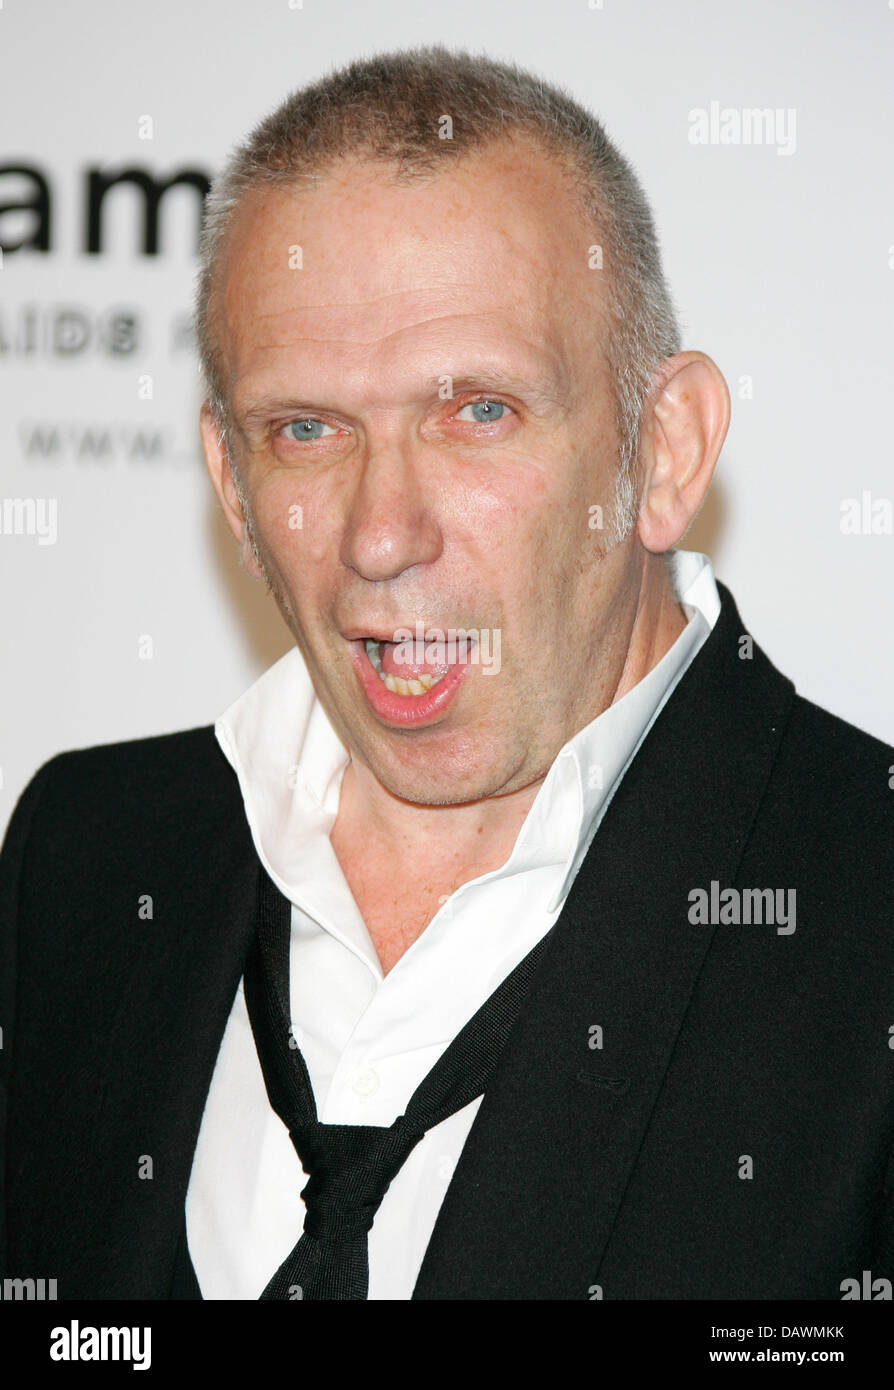 Designer Jean-Paul Gaultier poses at the American Foundation for Aids ...